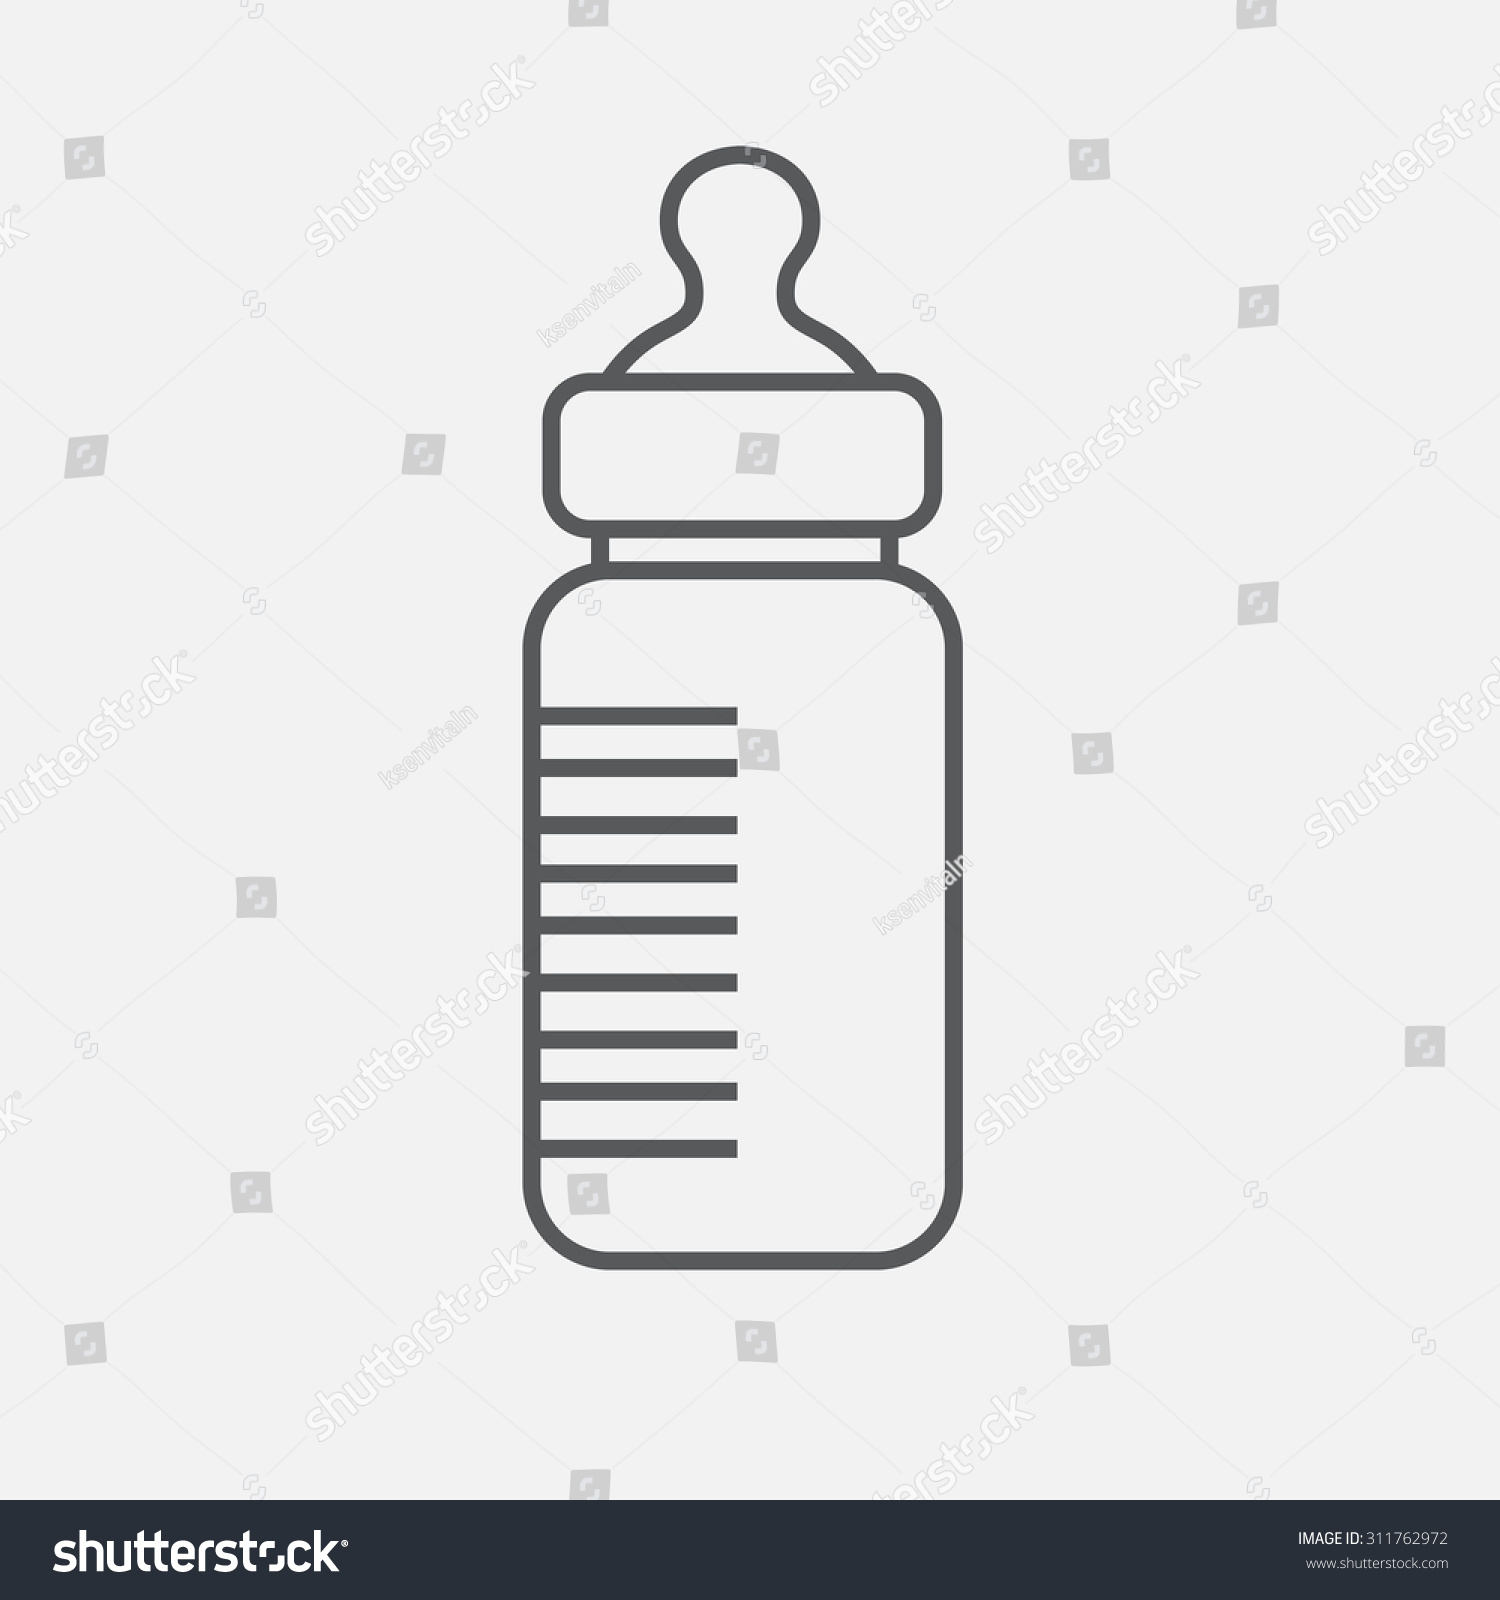 Download Vector Outline Icon Baby Bottle Baby Stock Vector ...